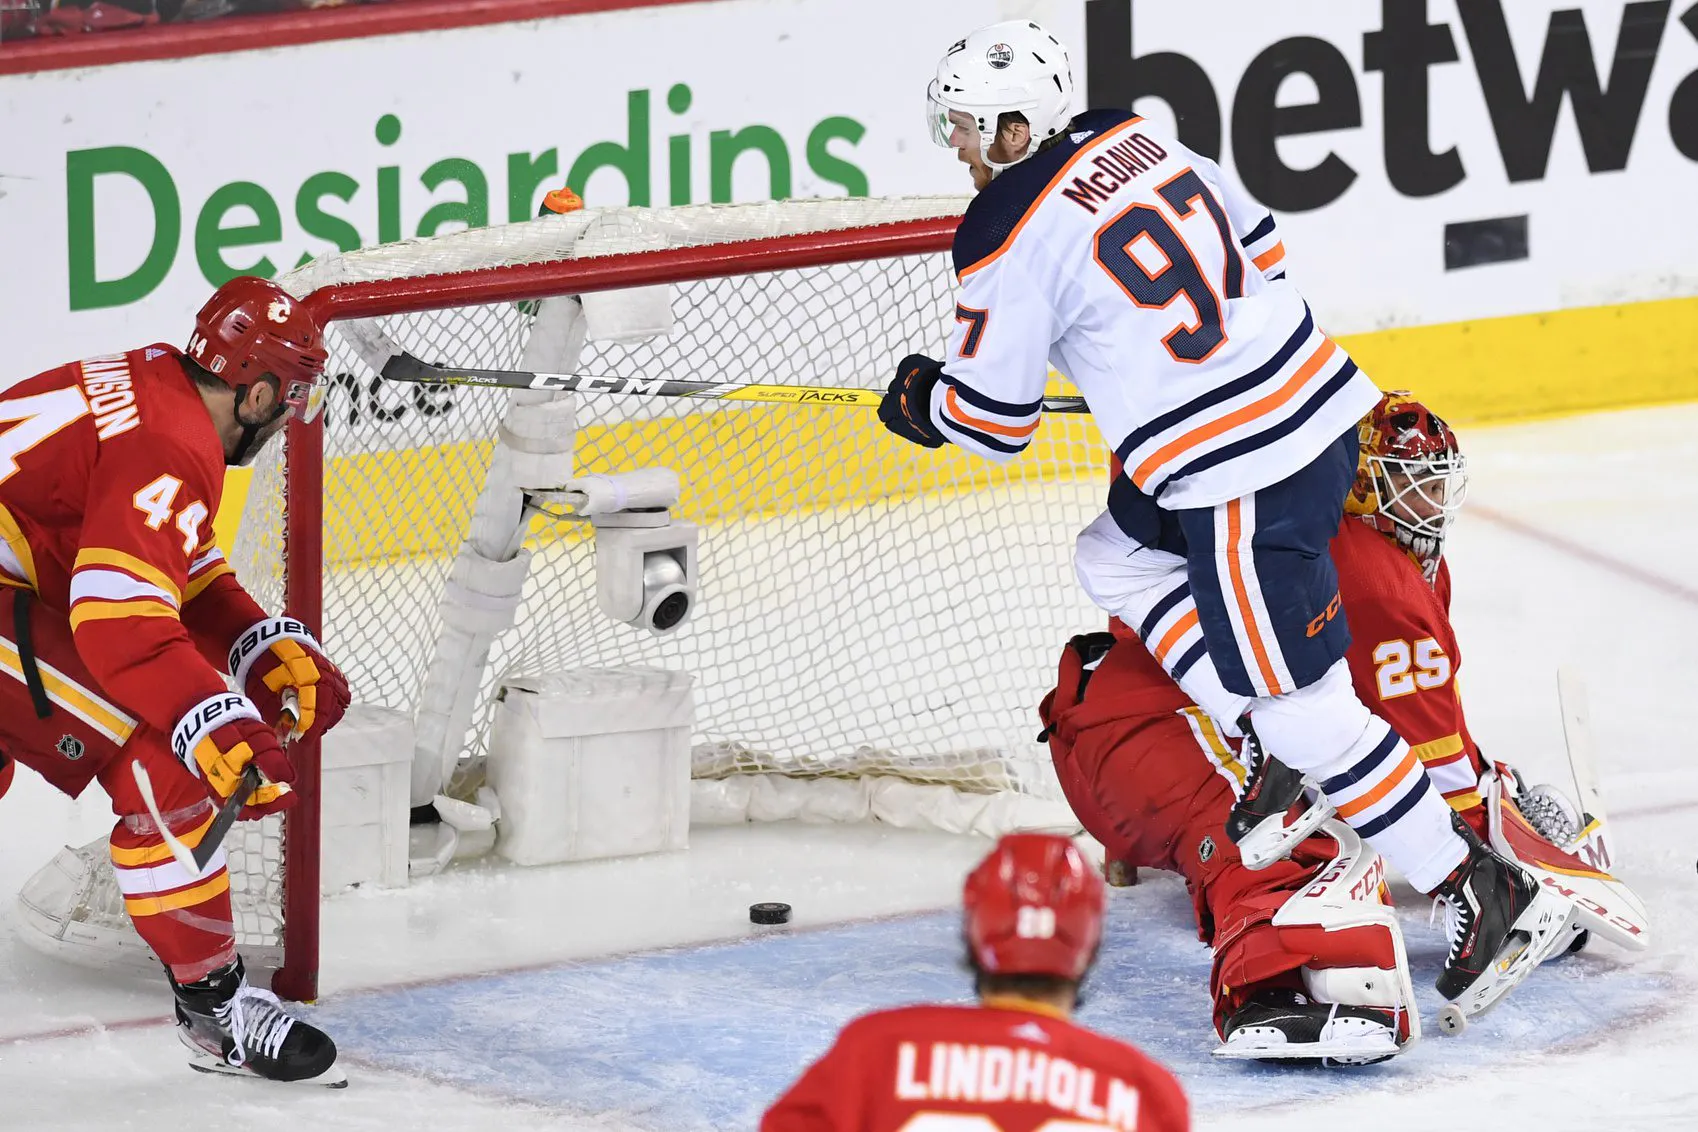 Stanley Cup Playoffs Day 18: Shesterkin and Raanta battle again, Oilers complete comeback to tie series